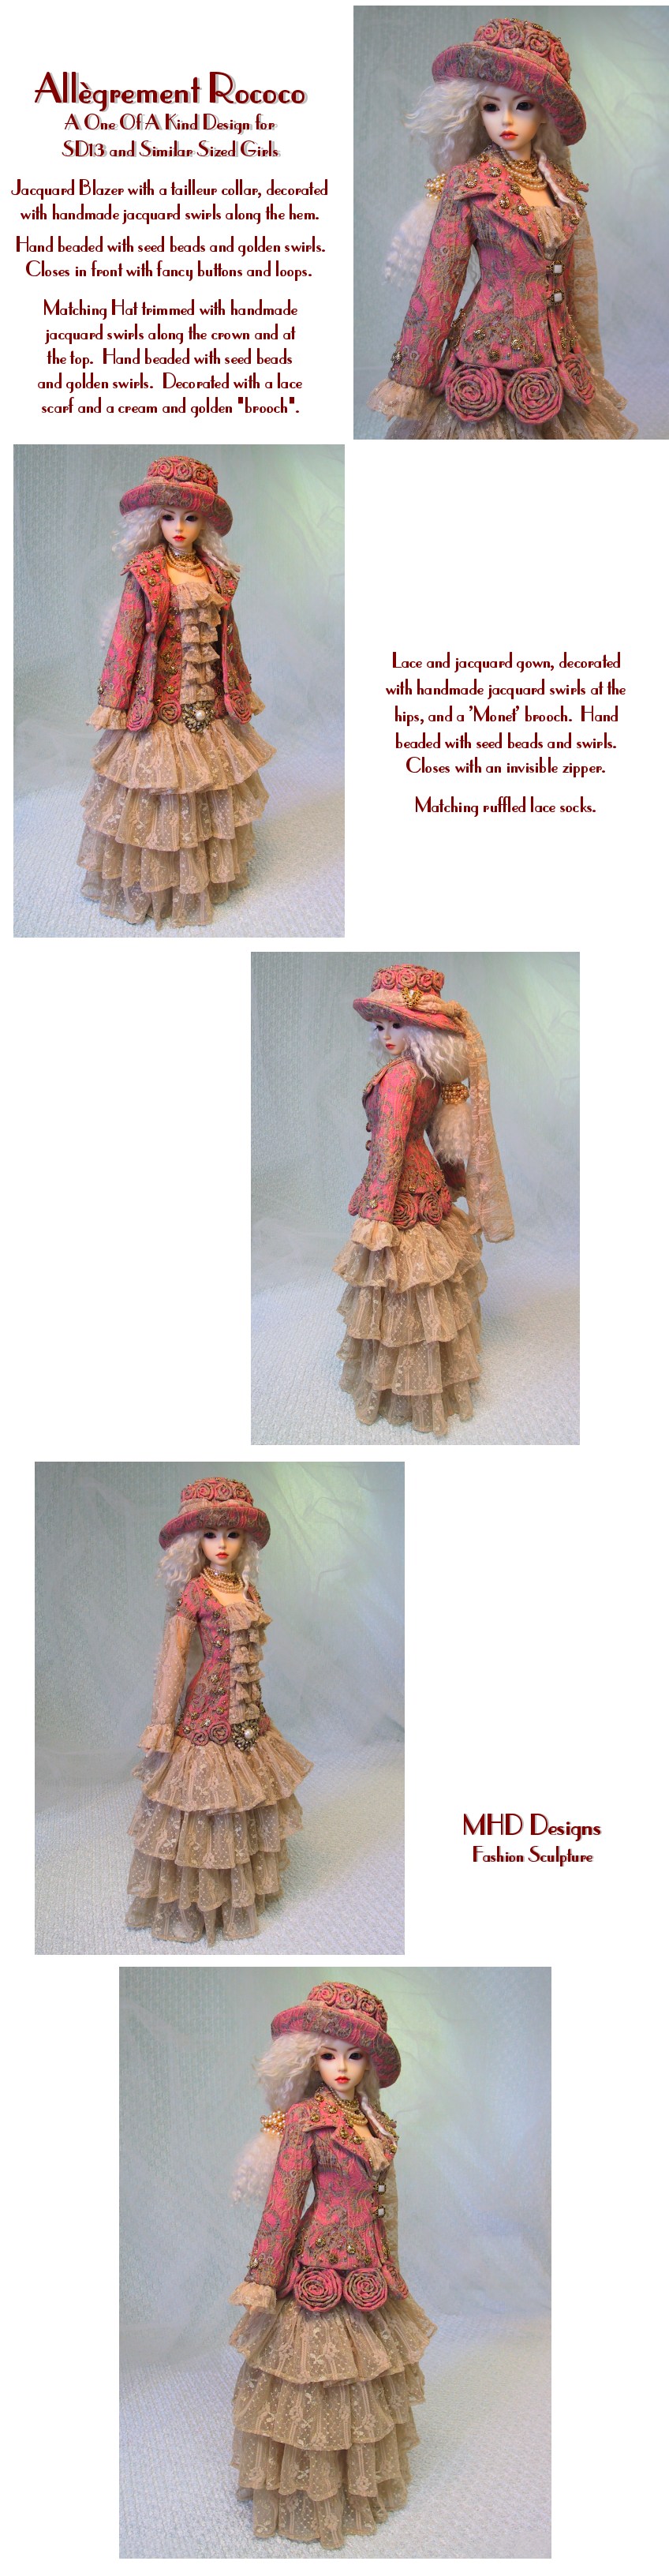 Lighthearted Rococo - an OOAK Design by Magalie Houle Dawson - 5 High Resolution Photographs, your patience is appreciated!